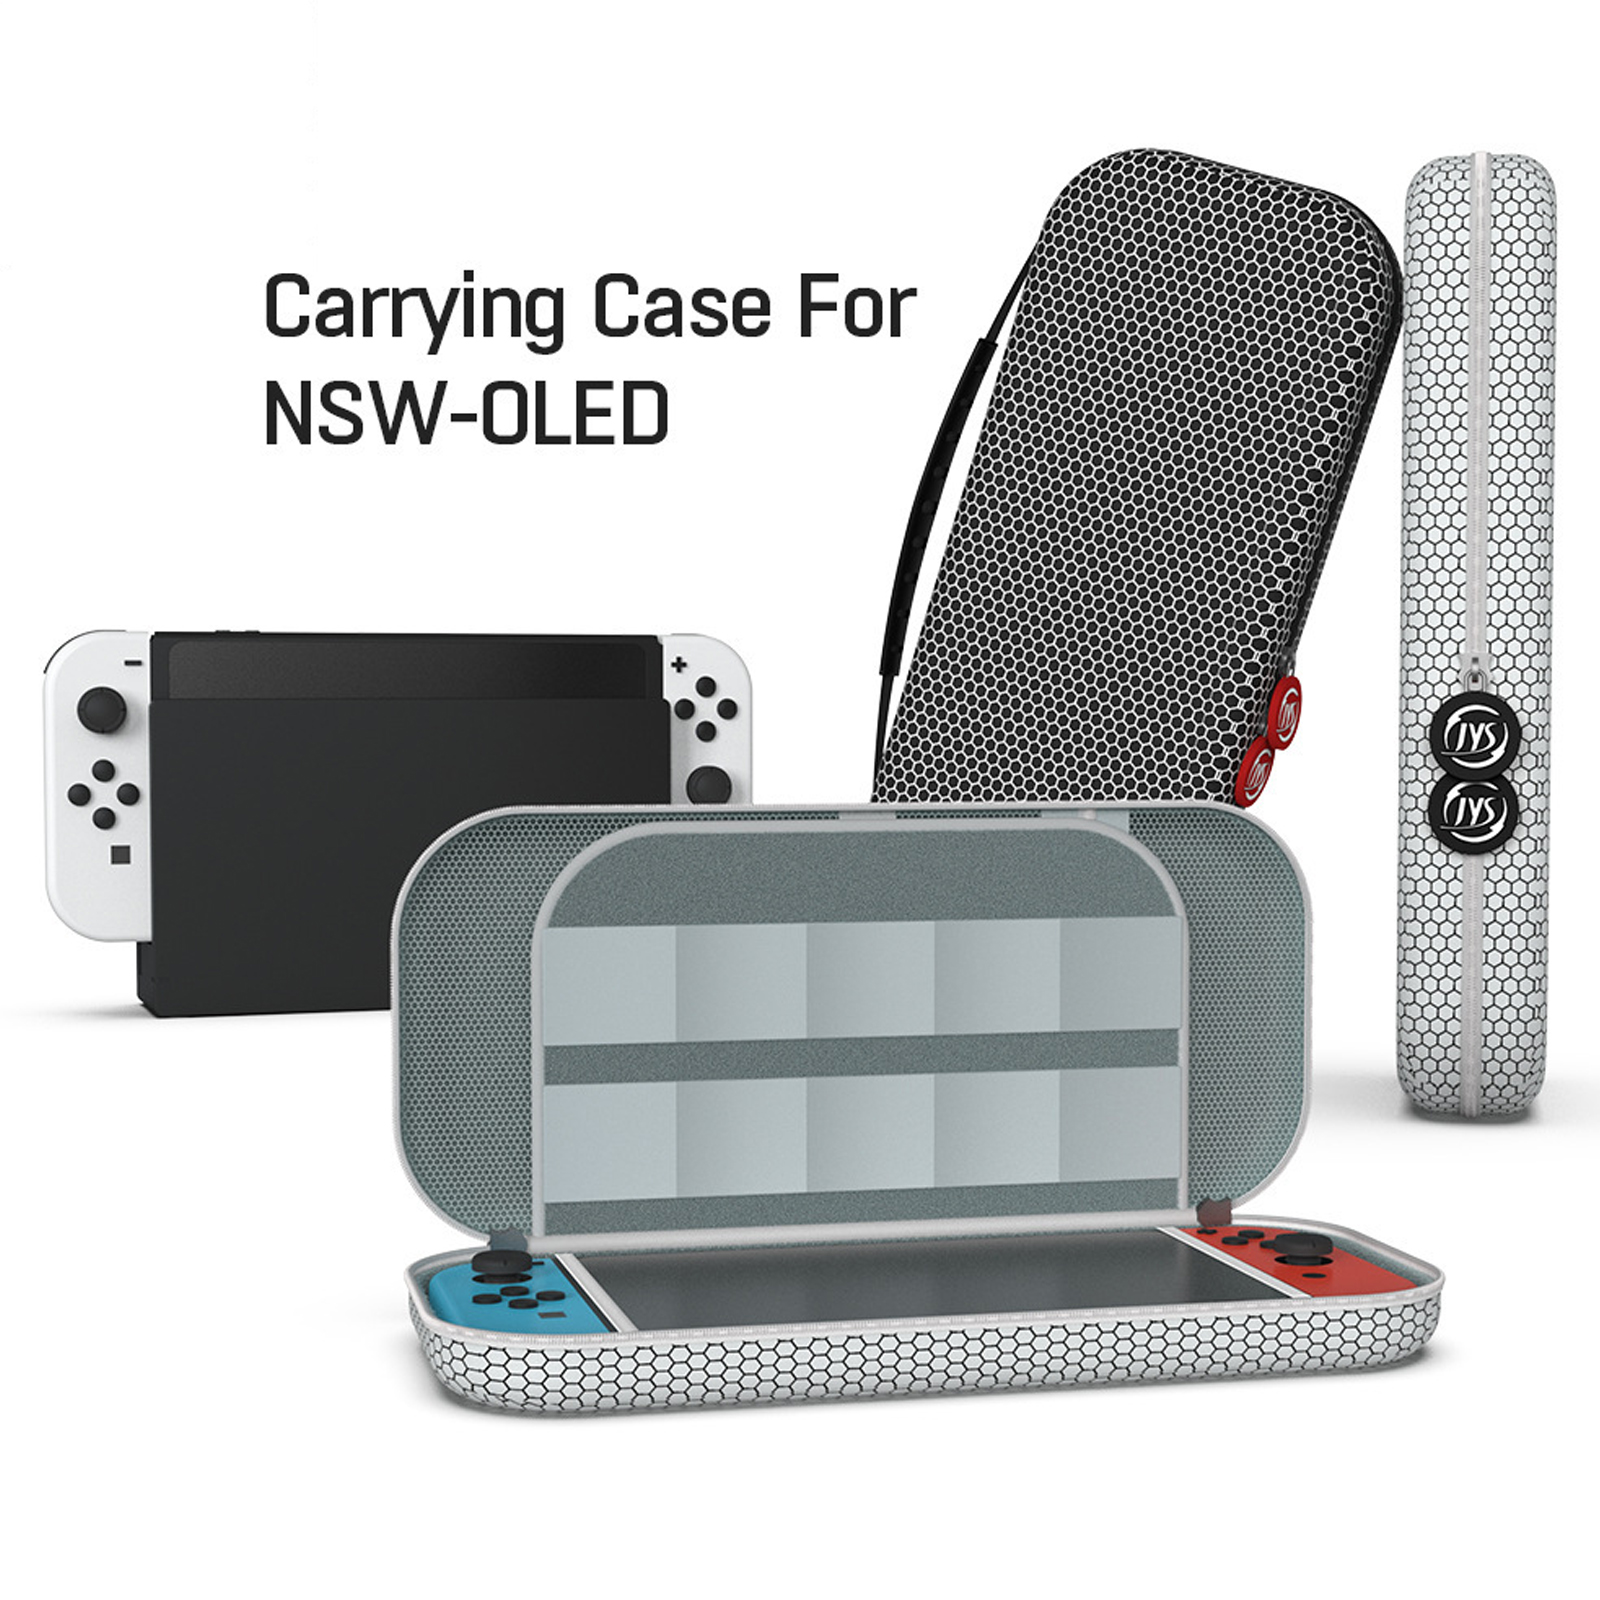 

Carrying Cases for Nintendo OLED Switch, Hard Waterproof Protective Portable Lightweight Travel Case